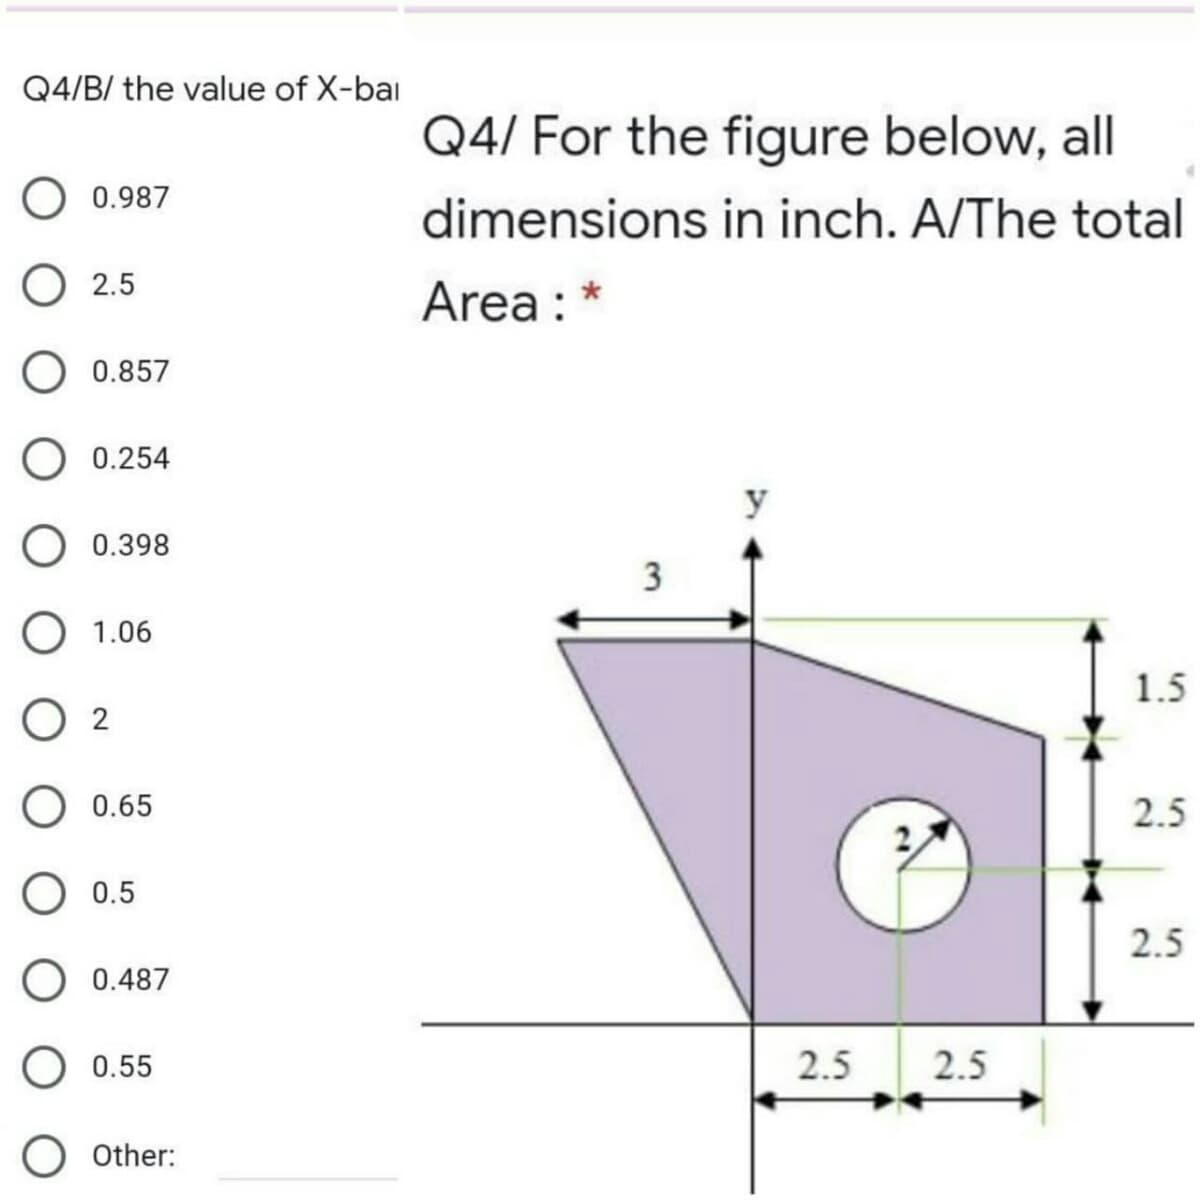 Q4/B/ the value of X-bai
Q4/ For the figure below, all
0.987
dimensions in inch. A/The total
O 2.5
Area : *
O 0.857
O 0.254
y
0.398
O 1.06
1.5
O 2
0.65
2.5
0.5
2.5
O 0.487
0.55
2.5
2.5
Other:
3.
